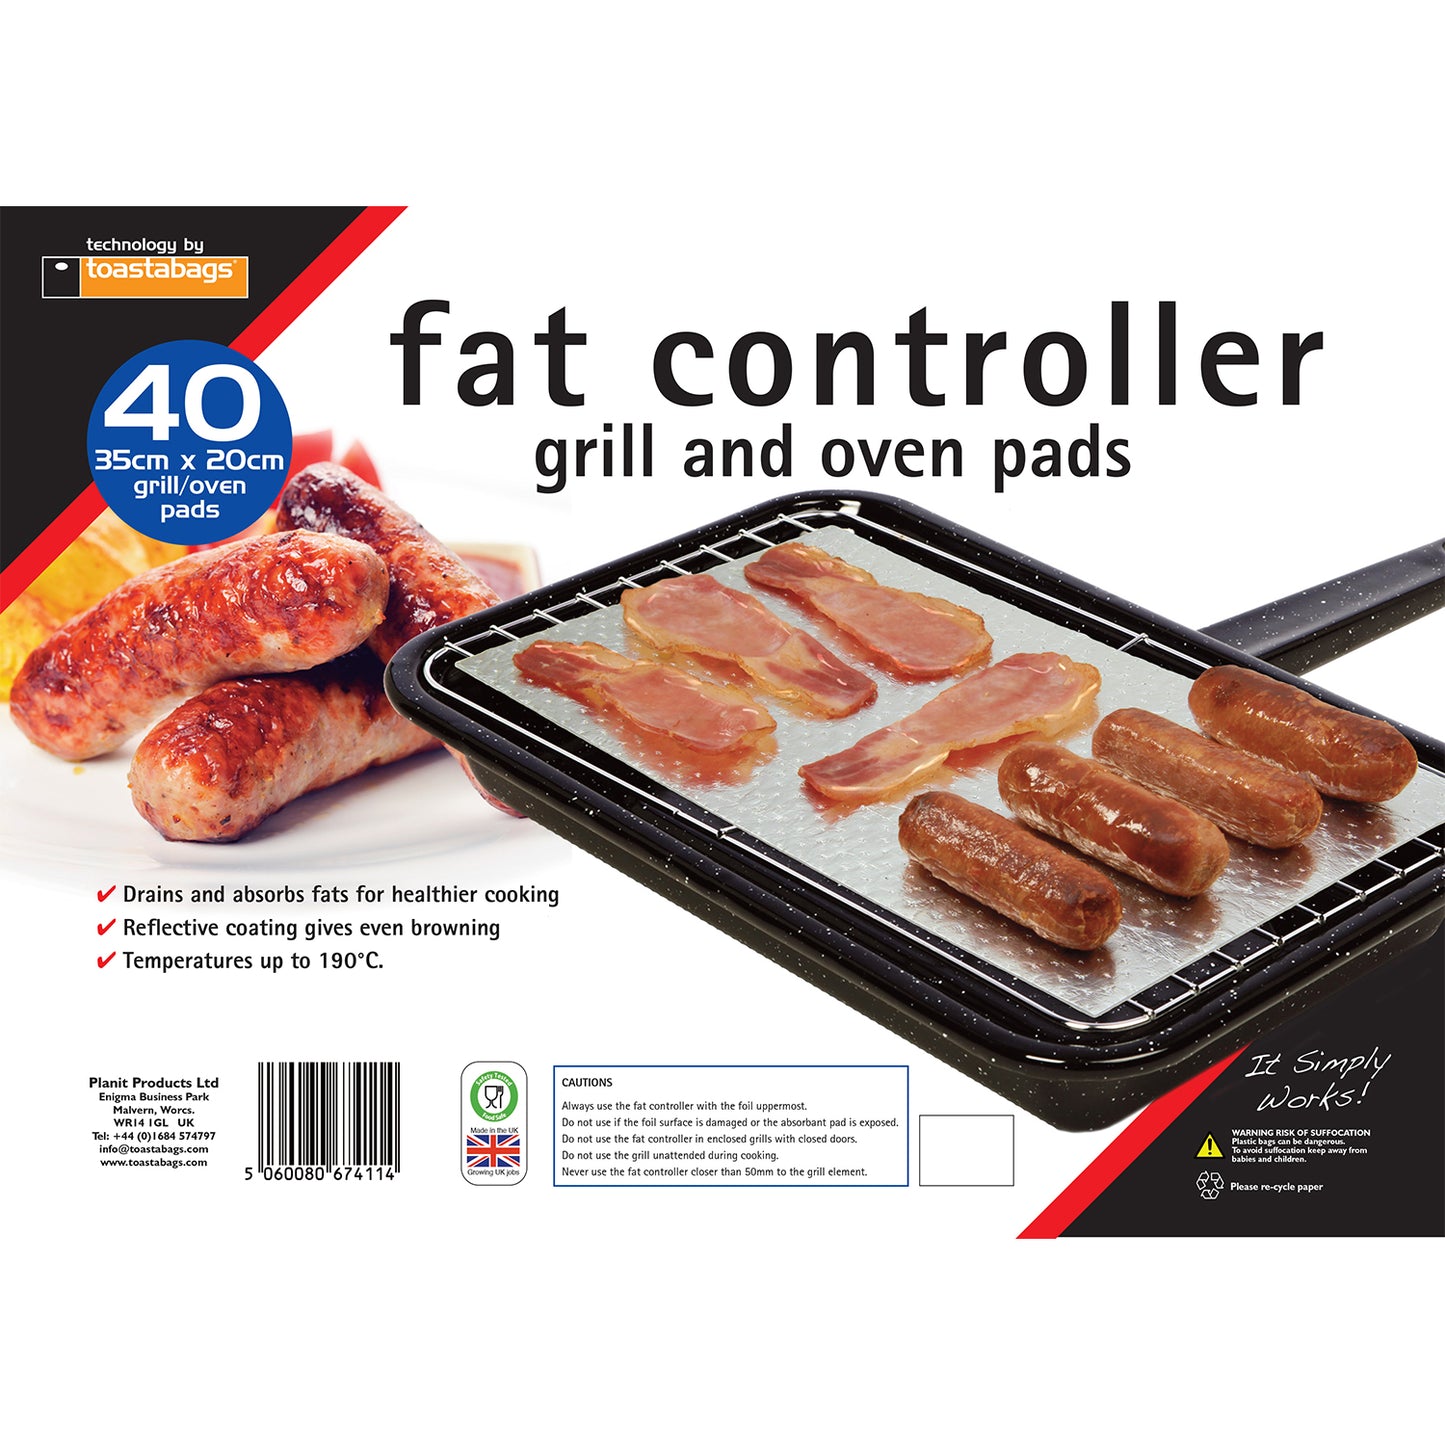 Fat Controller - Grill & Oven Pads